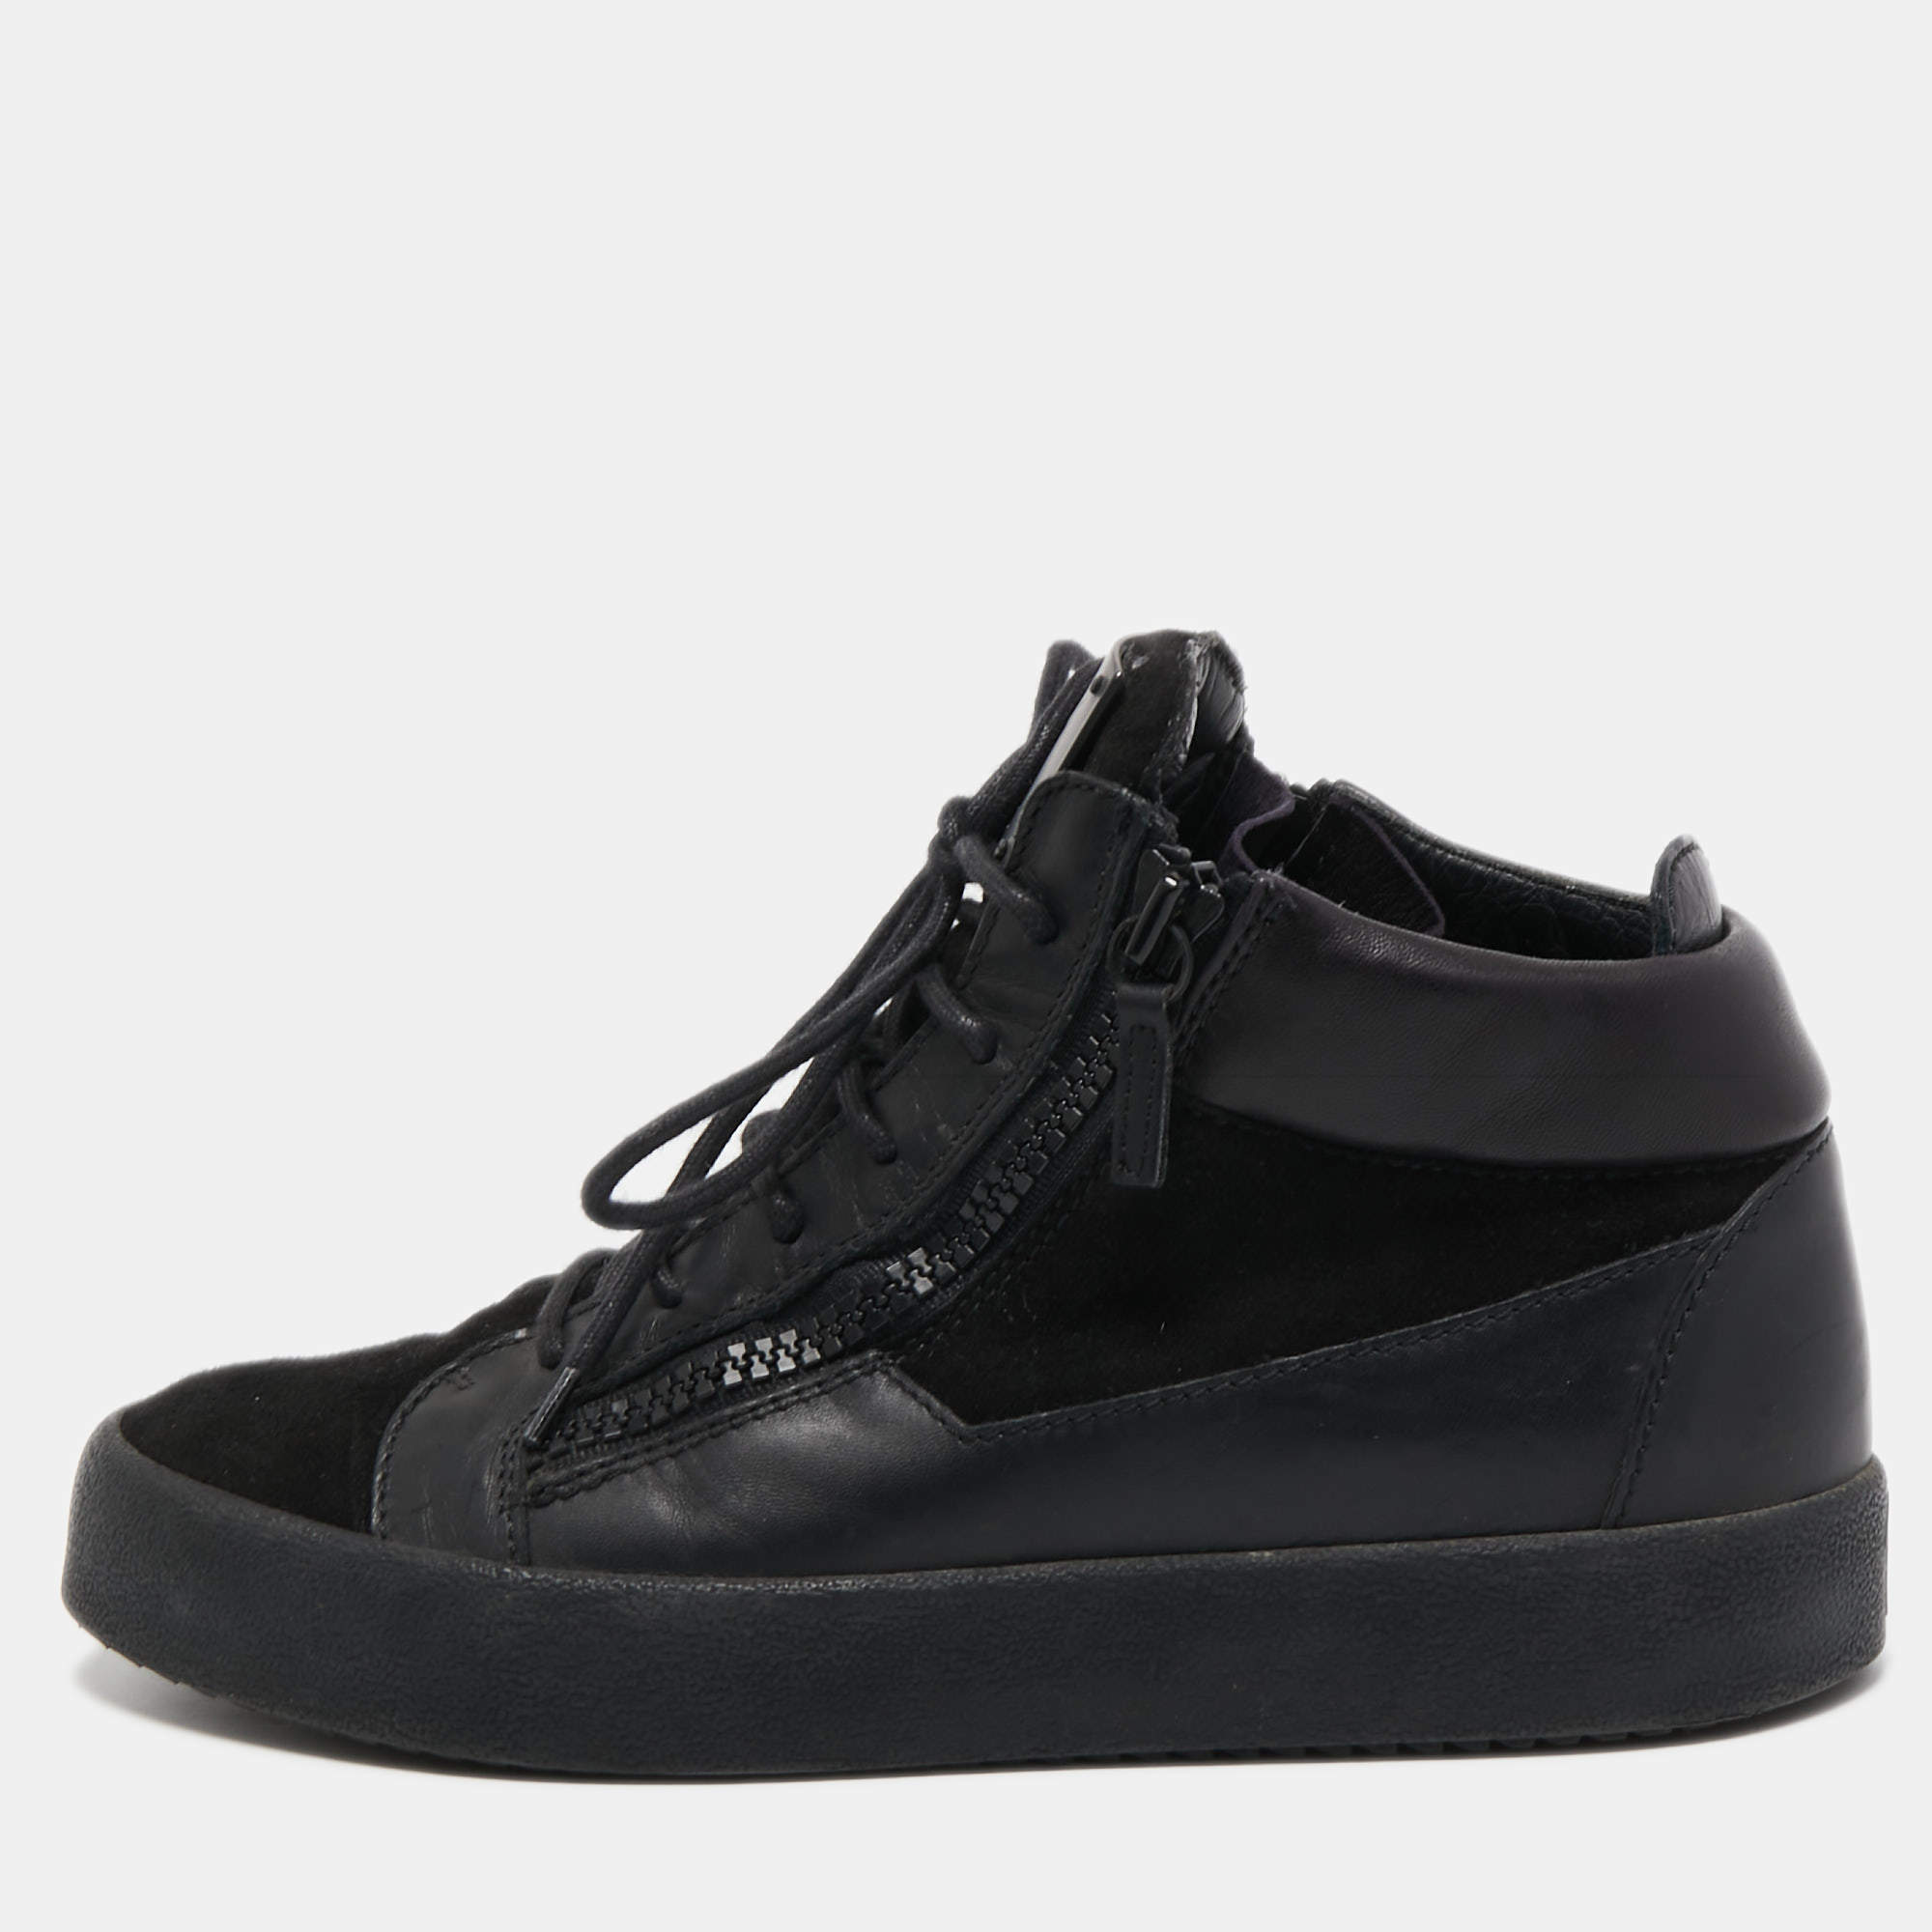 Giuseppe Black Leather and Suede Top Sneakers Size 42 Giuseppe Zanotti TLC